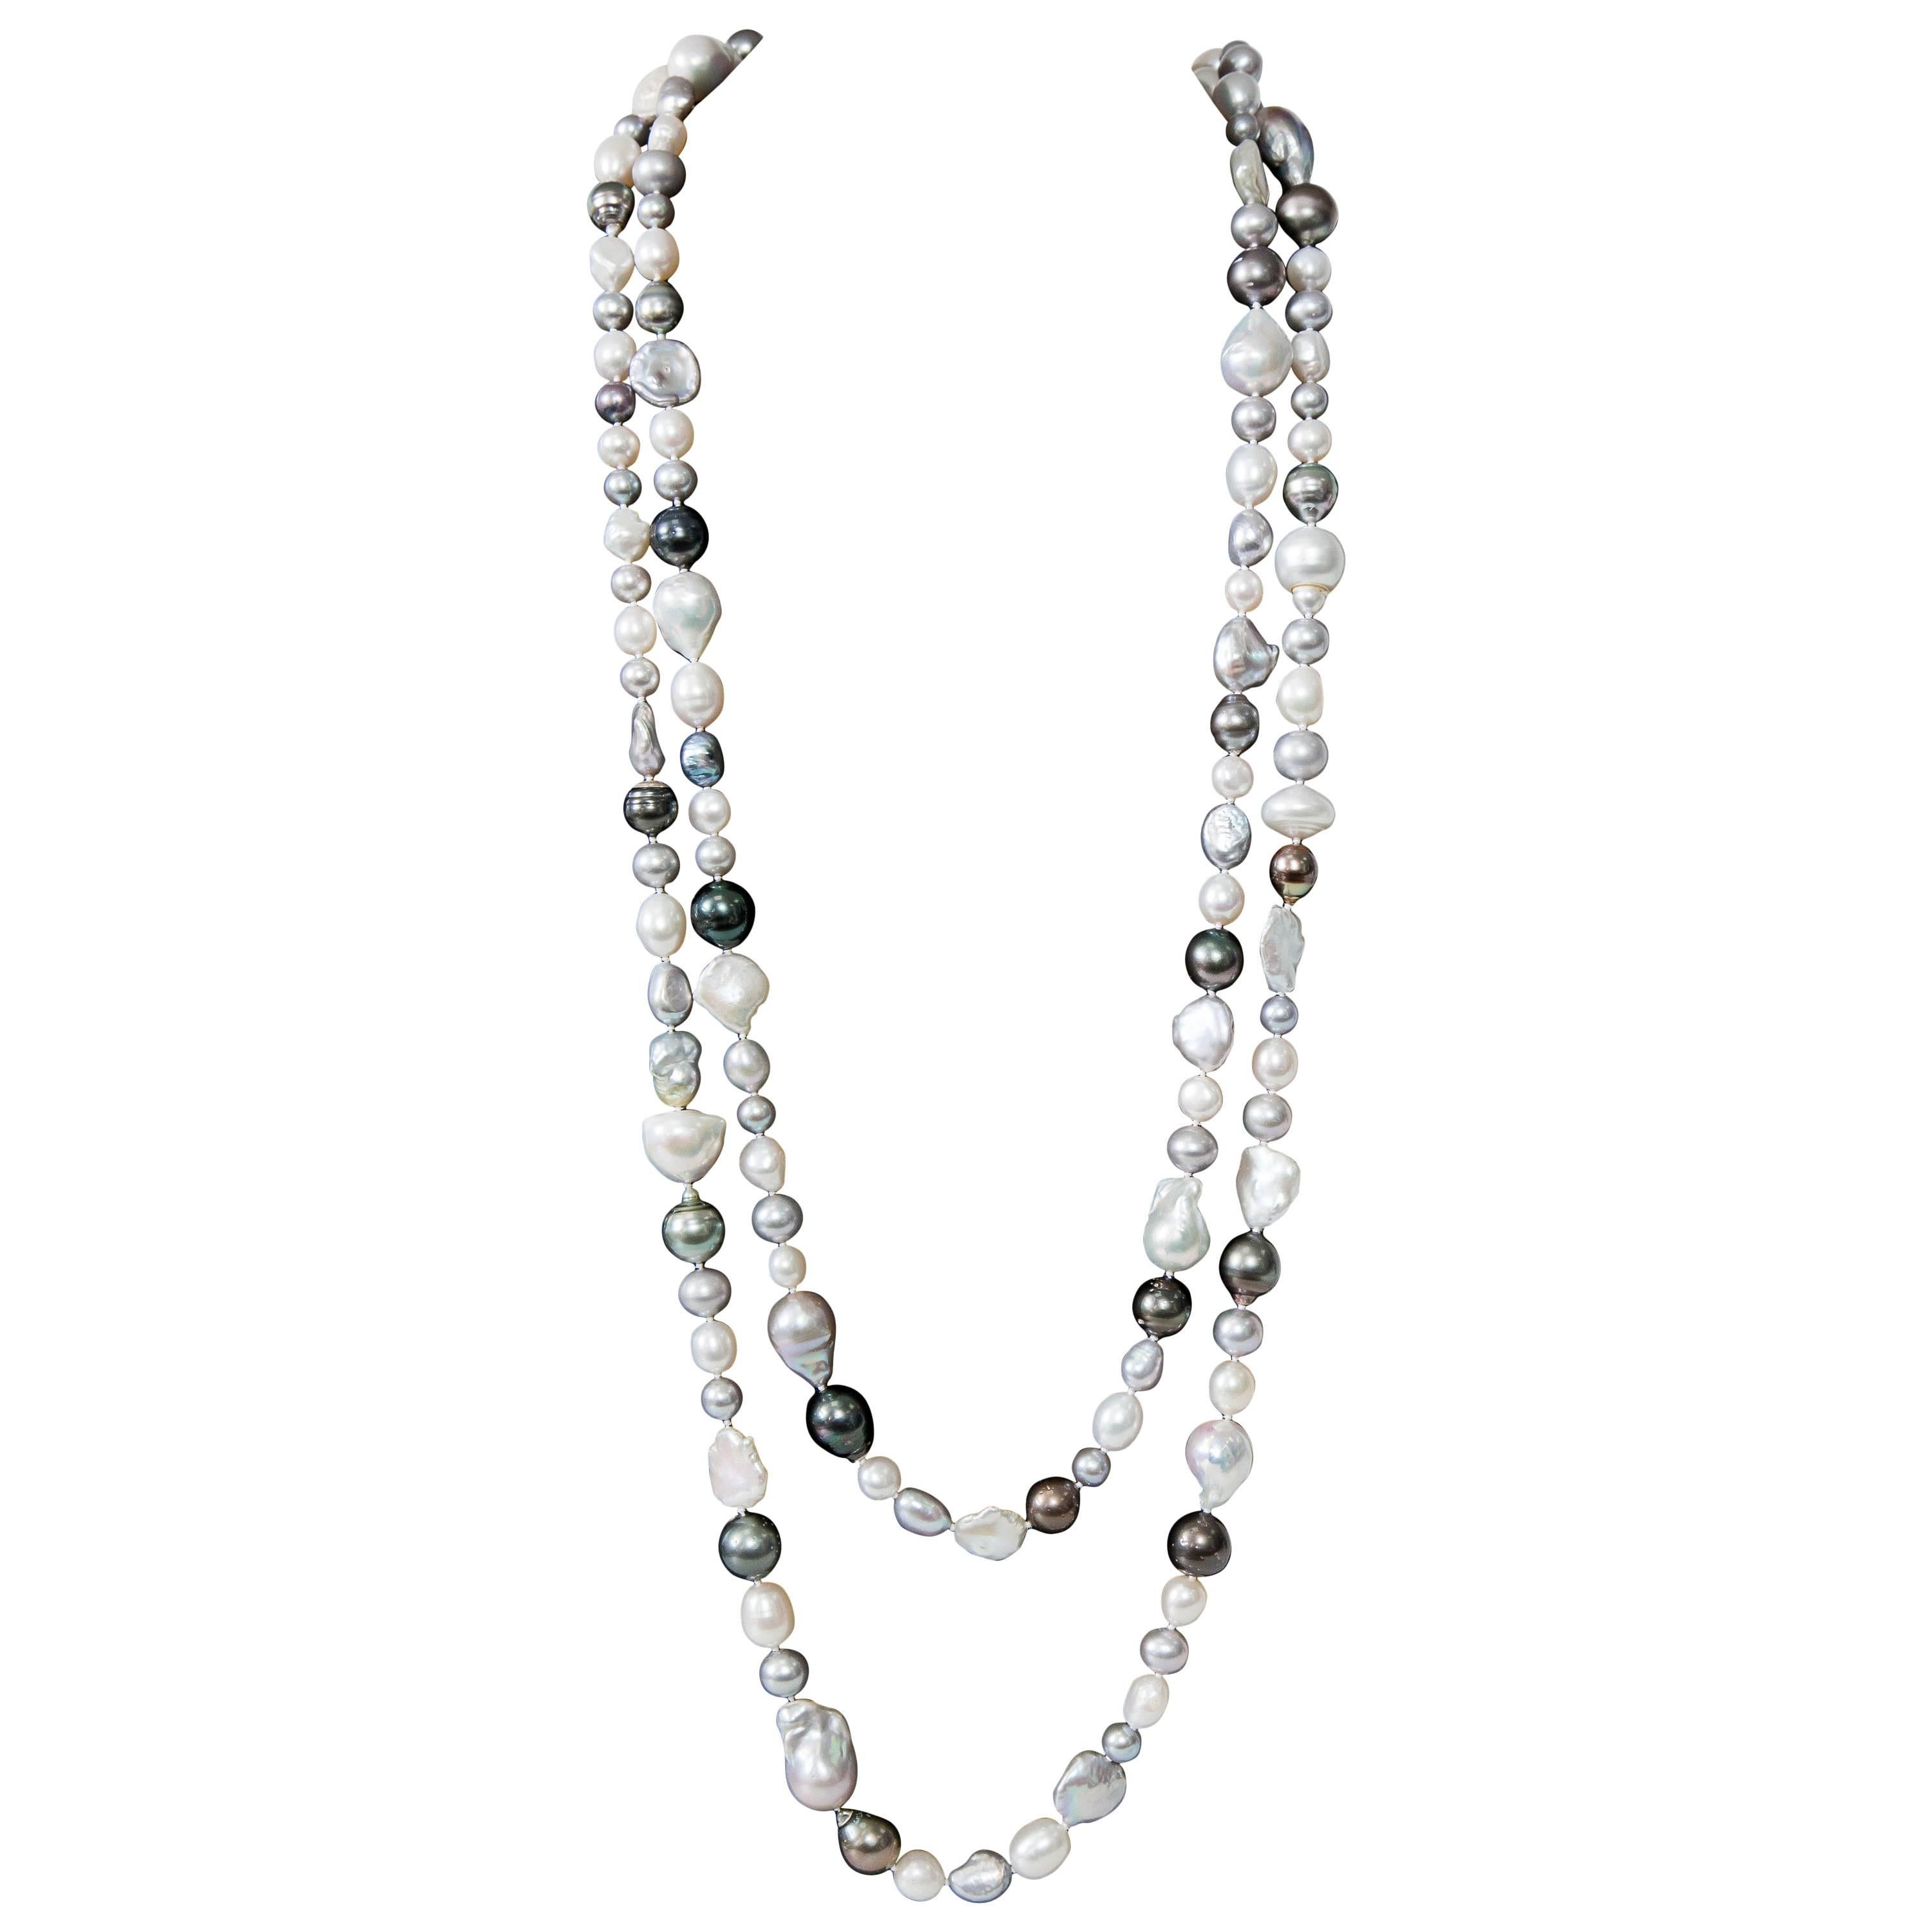 Mixed Multi-Color Necklace Opera Lenght